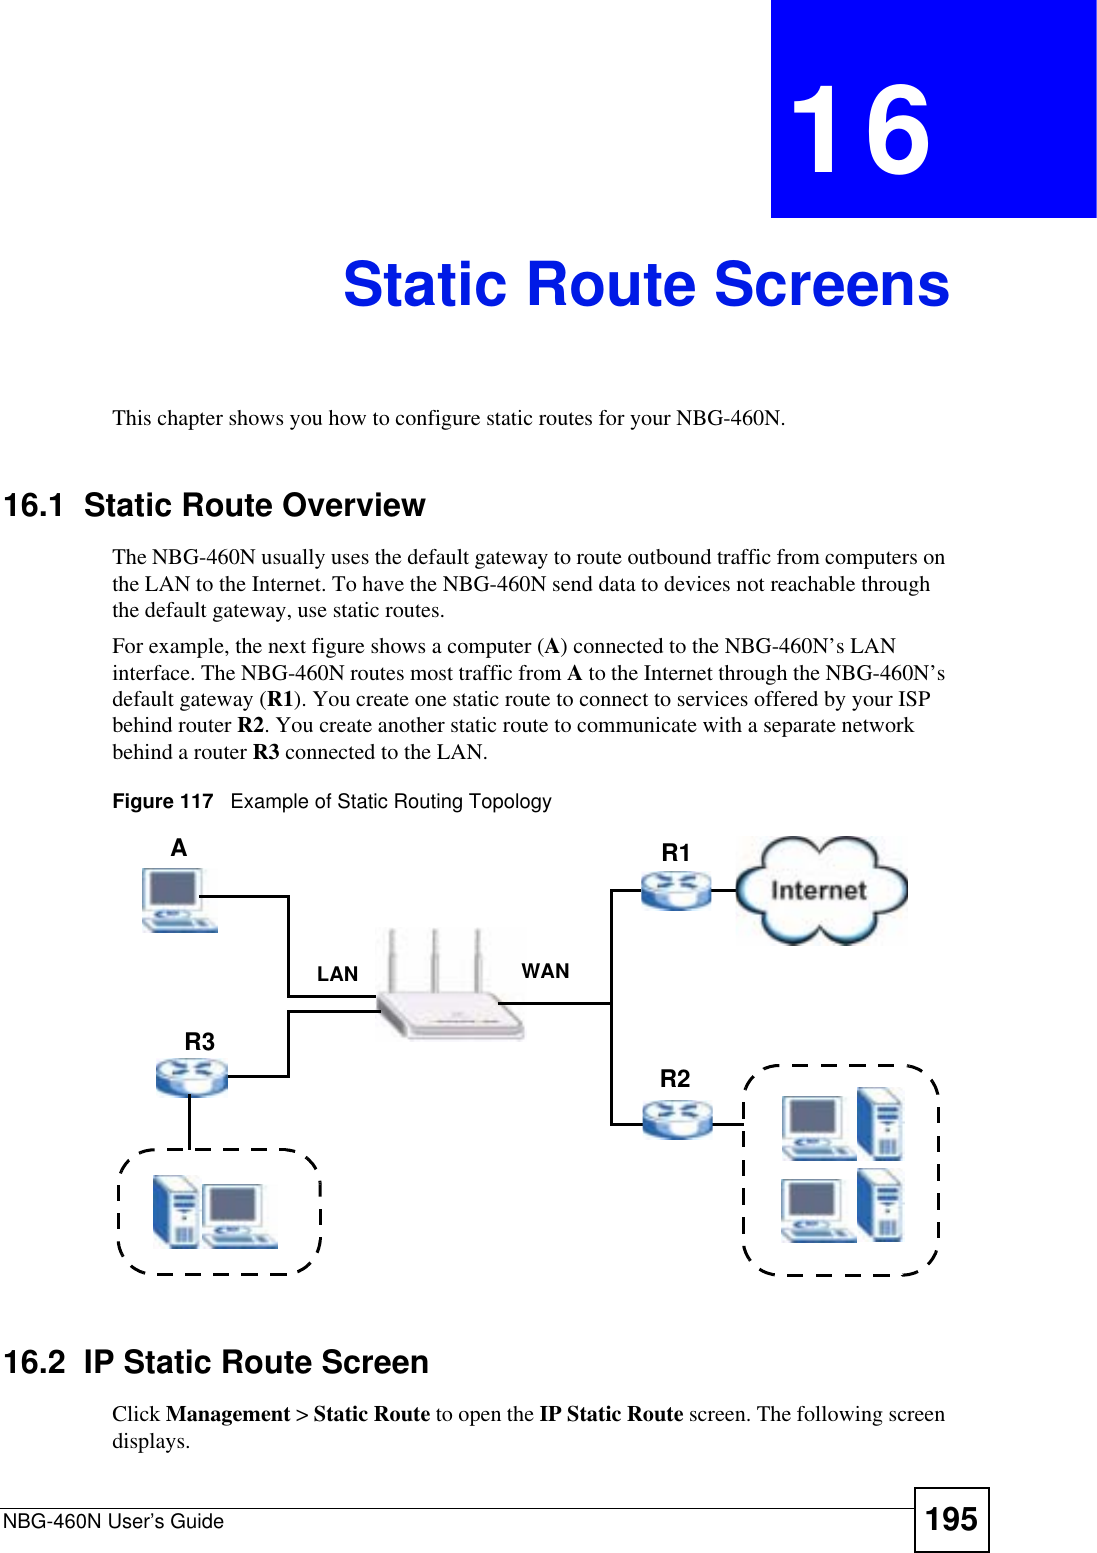 NBG-460N User’s Guide 195CHAPTER 16Static Route ScreensThis chapter shows you how to configure static routes for your NBG-460N.16.1  Static Route OverviewThe NBG-460N usually uses the default gateway to route outbound traffic from computers on the LAN to the Internet. To have the NBG-460N send data to devices not reachable through the default gateway, use static routes.For example, the next figure shows a computer (A) connected to the NBG-460N’s LAN interface. The NBG-460N routes most traffic from Ato the Internet through the NBG-460N’s default gateway (R1). You create one static route to connect to services offered by your ISP behind router R2. You create another static route to communicate with a separate network behind a router R3 connected to the LAN.Figure 117   Example of Static Routing Topology16.2  IP Static Route ScreenClick Management &gt; Static Route to open the IP Static Route screen. The following screen displays.WANR1R2AR3LAN